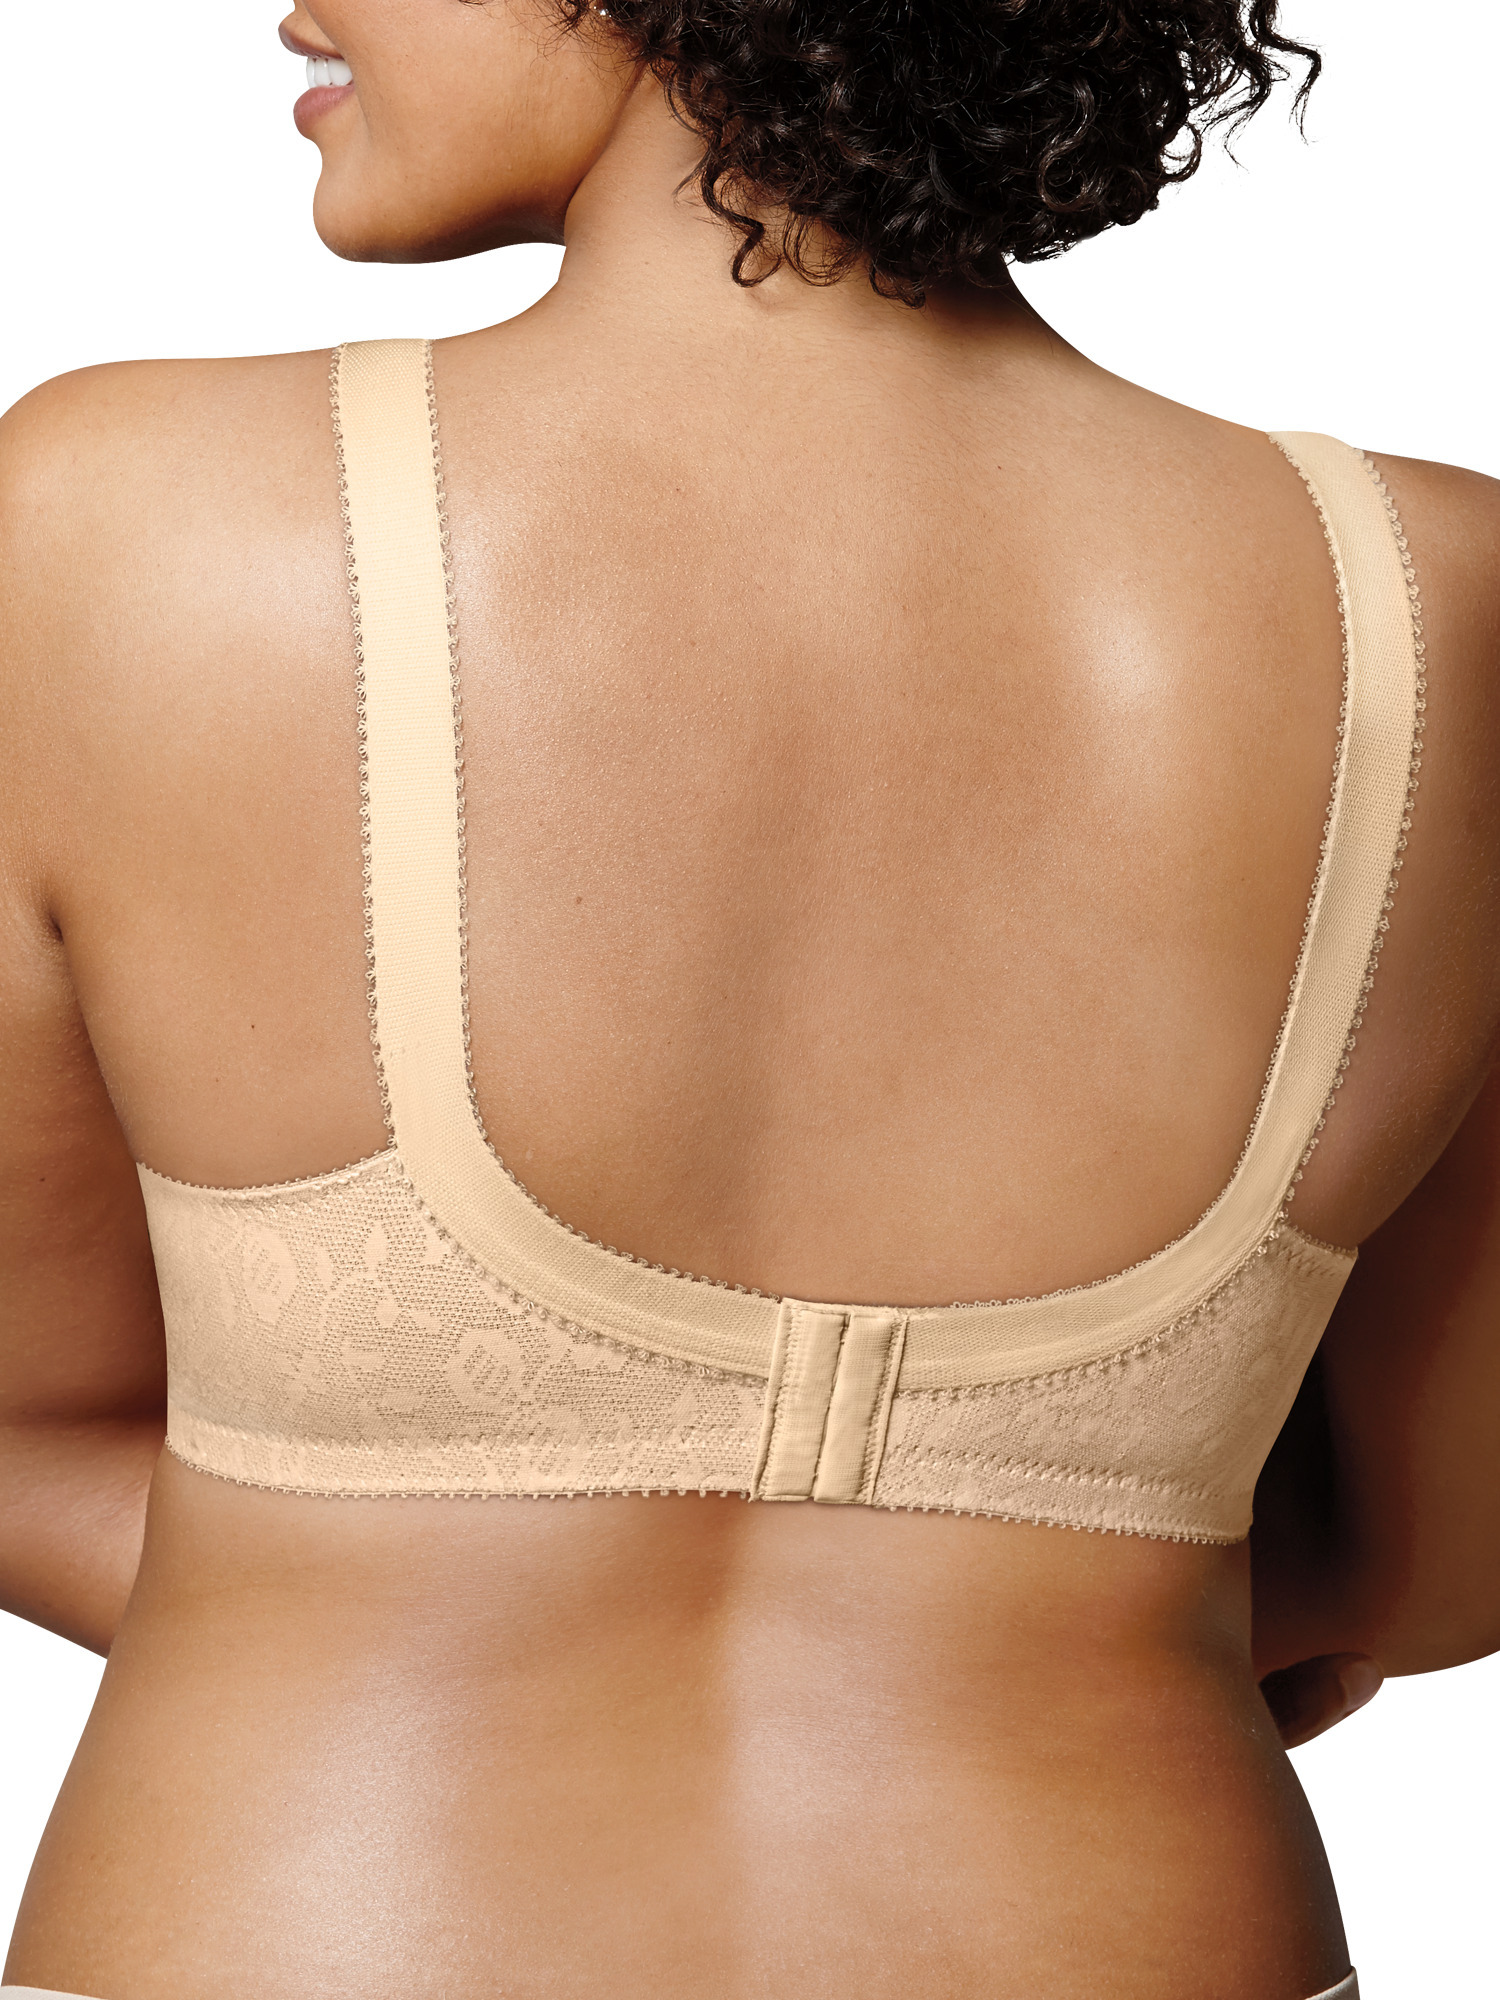 Bra Just Won't Fit? Playtex Offers Some Support